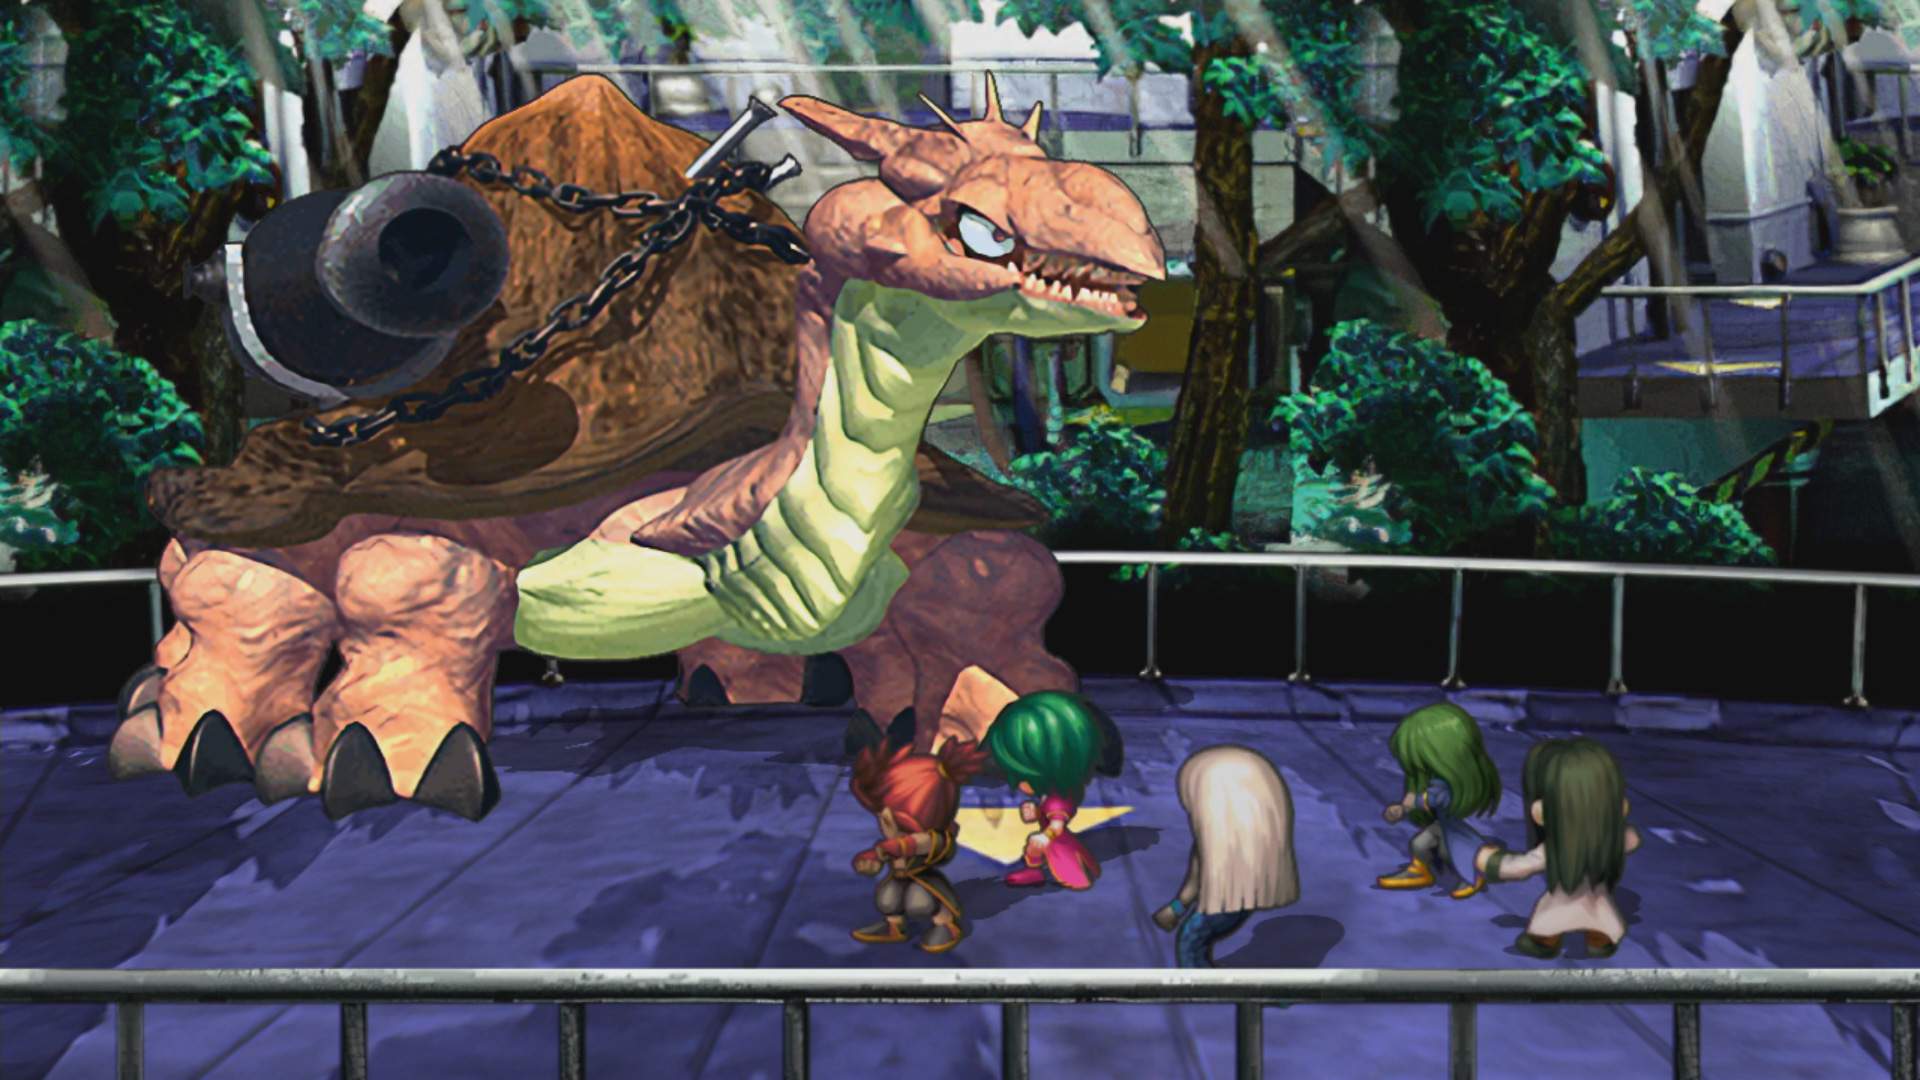 5 characters from SaGa Frontier Remastered face off against a large monster in a laboratory.